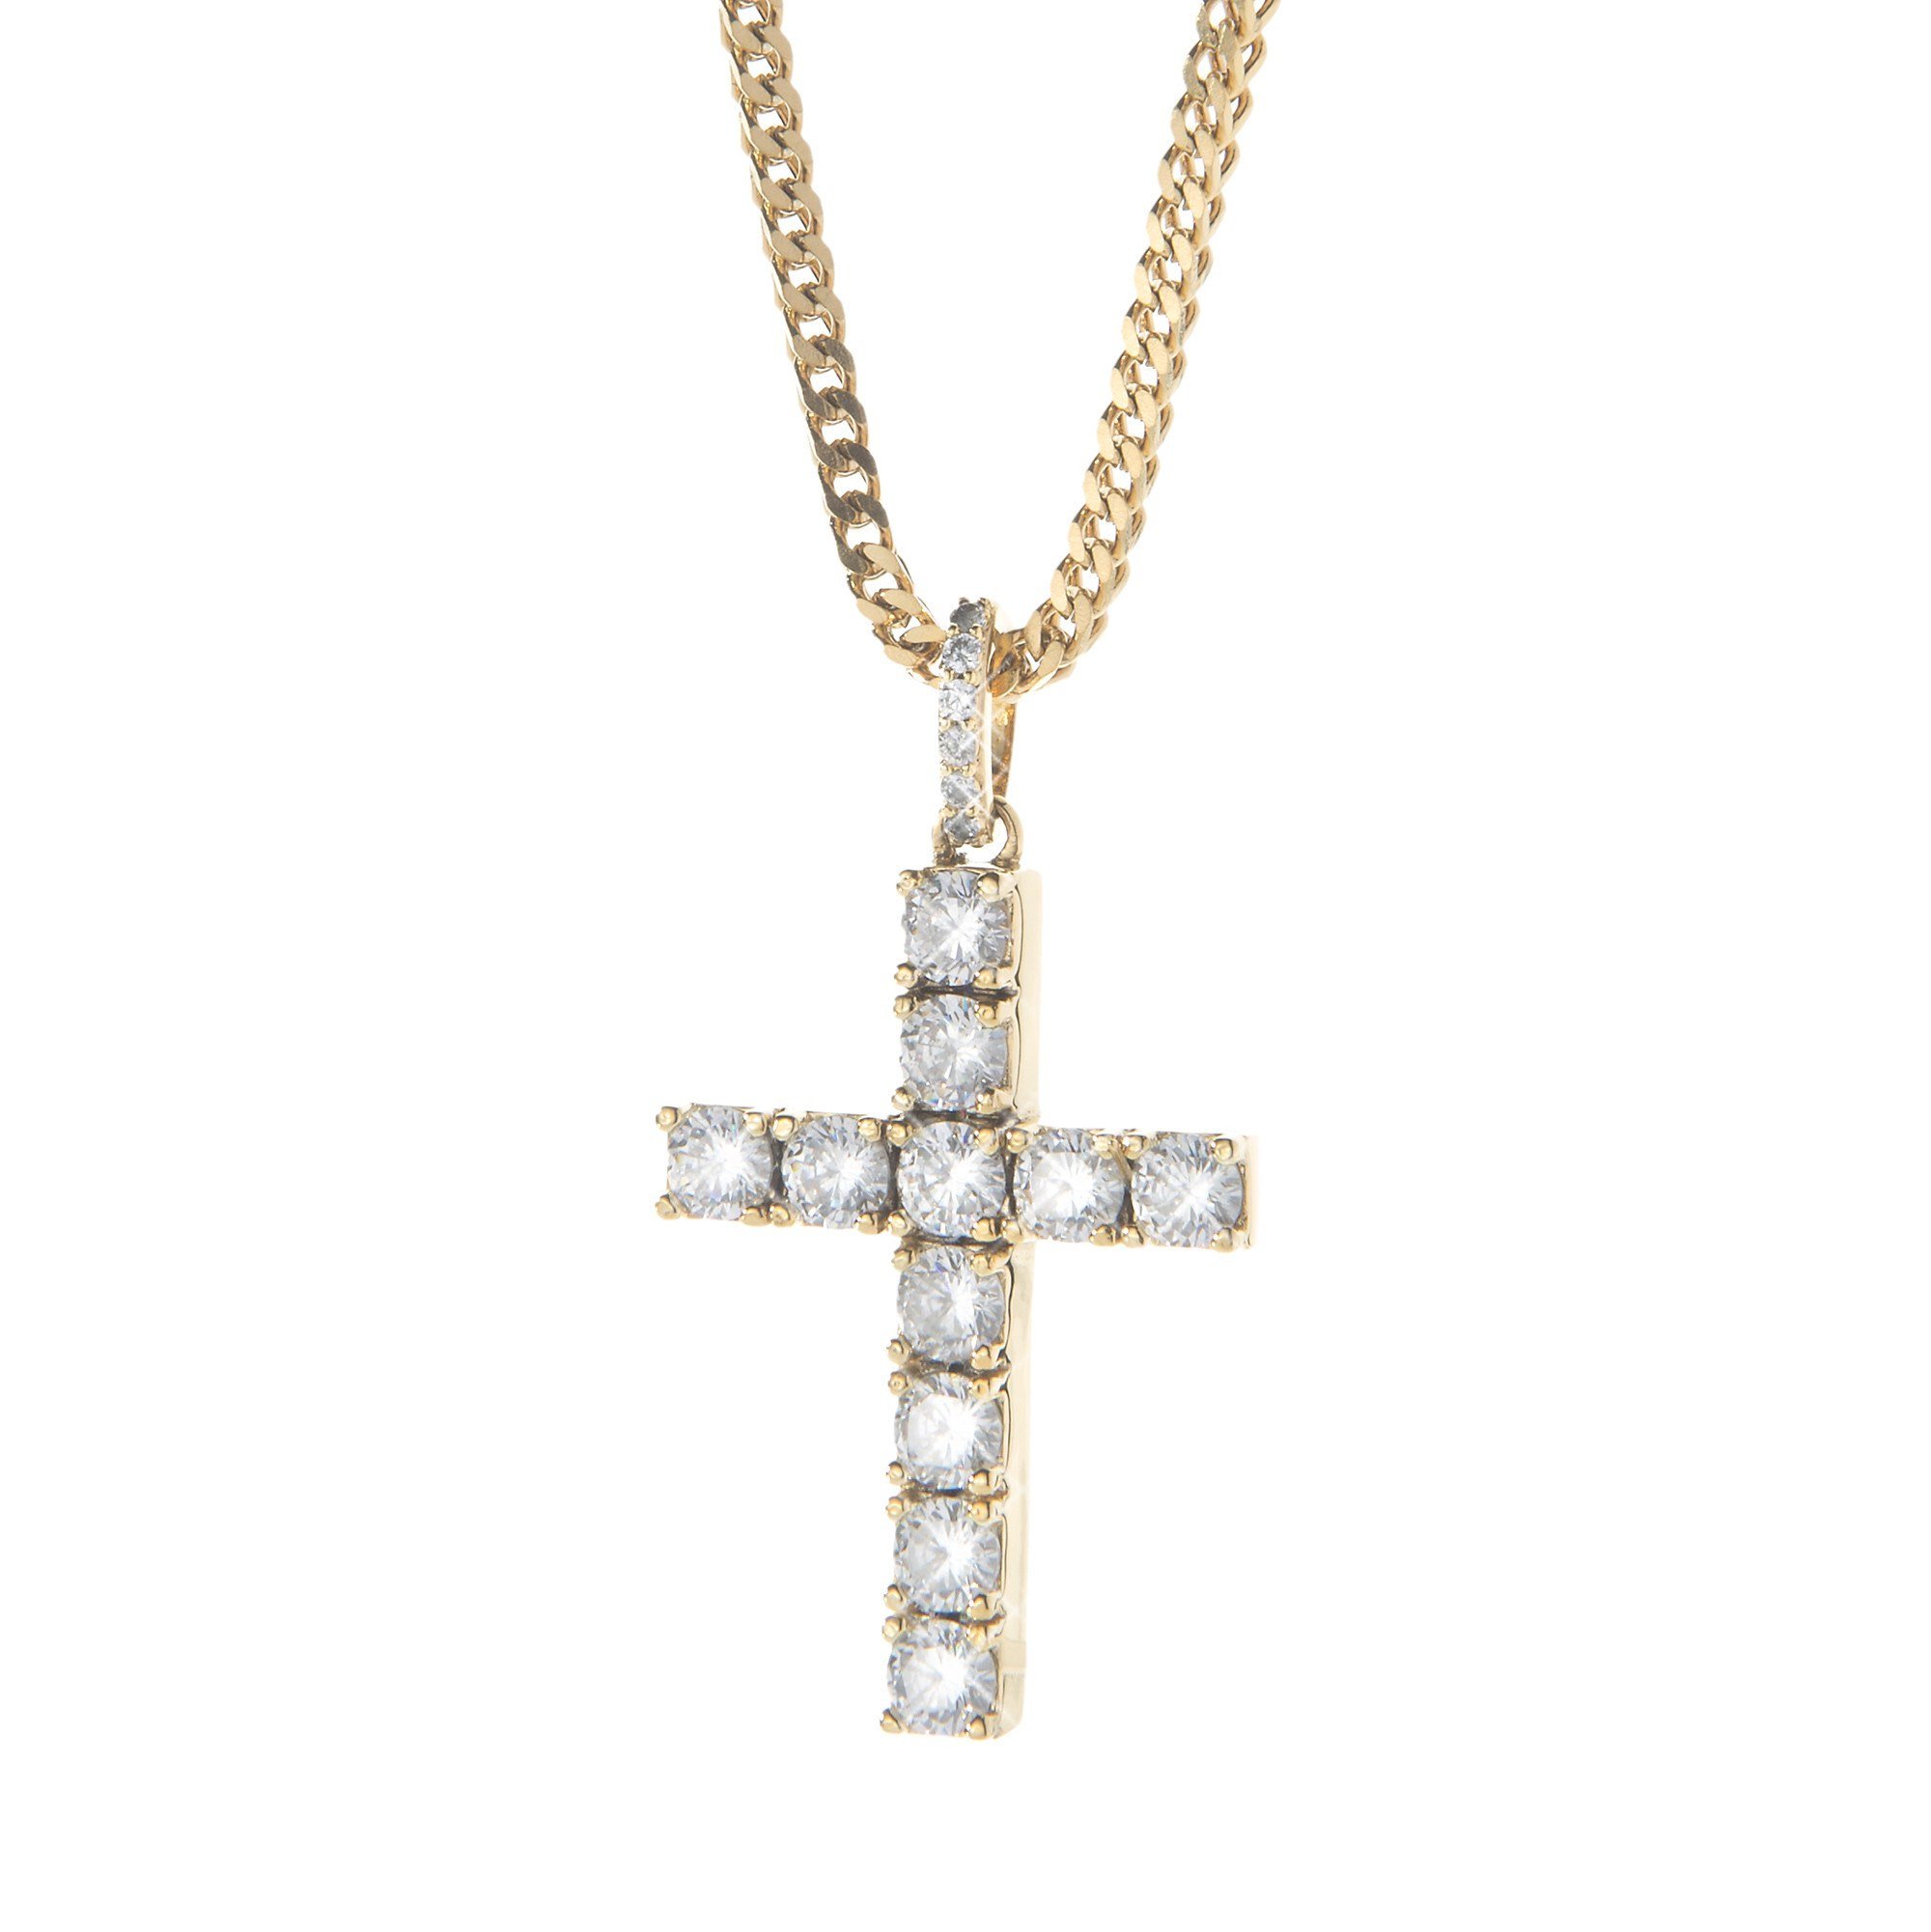 Diamond Cross Pendant In 18K Gold SpicyIce And Necklace - breakpoint.me